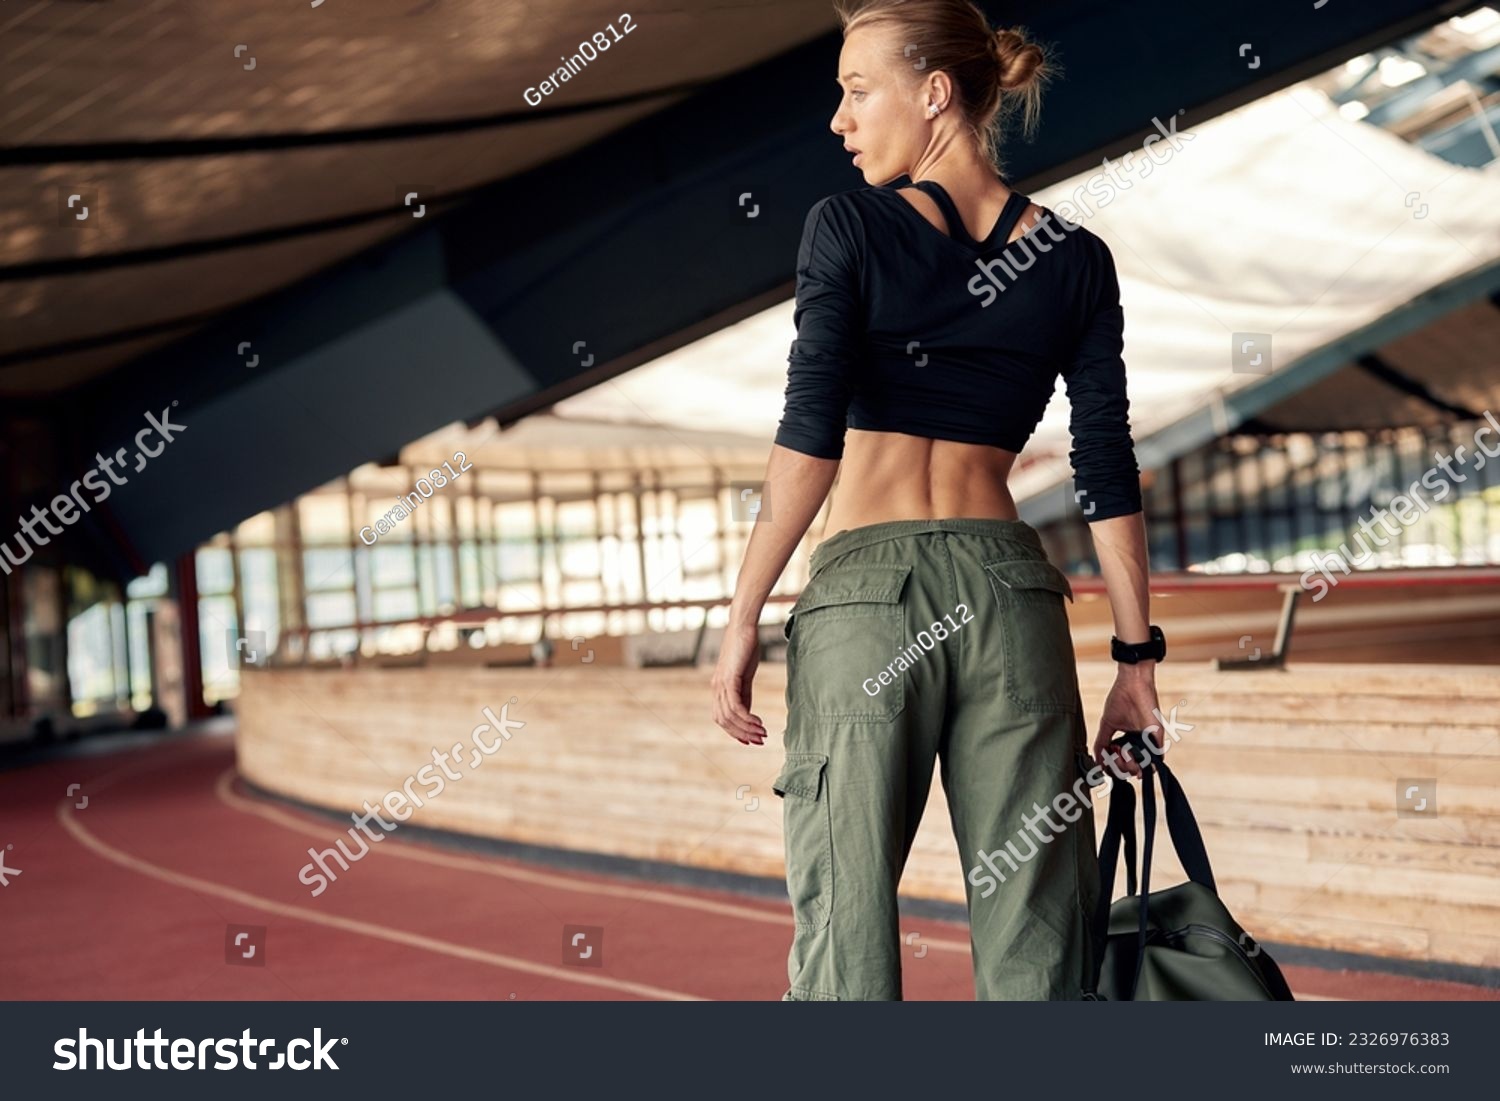 Cute young athlete girl getting ready for a workout at the stadium. Attractive slim blonde in a black top and khaki cargo pants with a sports bag goes to the locker room. Active lifestyle and sports. #2326976383